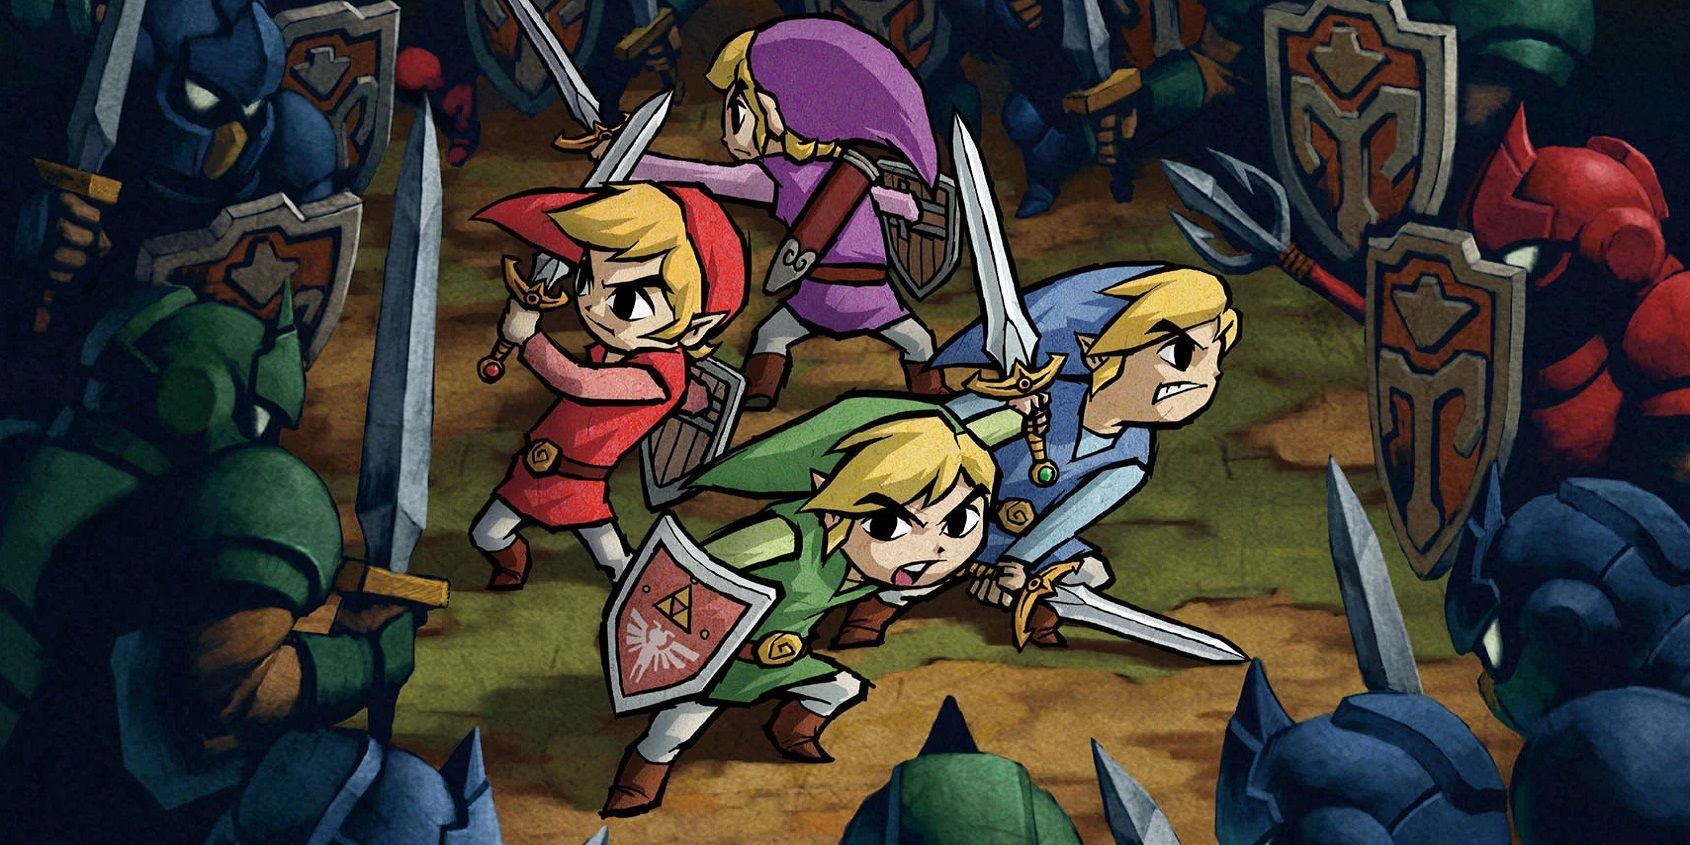 Four Links, split by the Four Sword, surrounded by enemies.